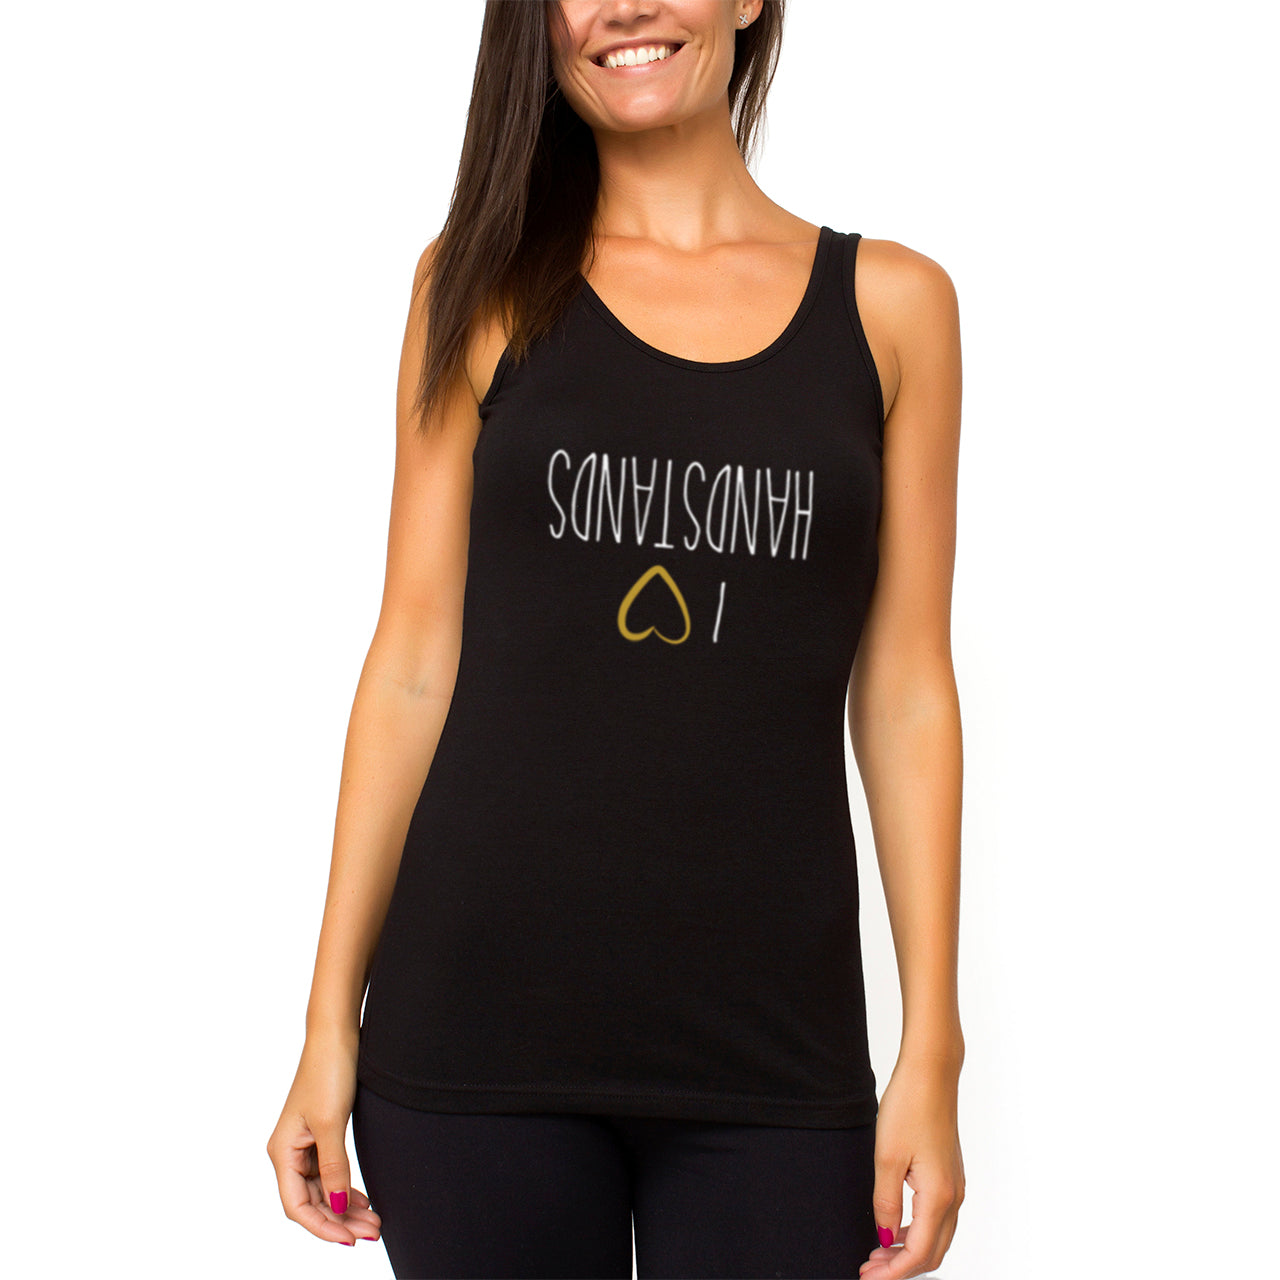 Stylish and Comfortable Women's Workout Tank Top